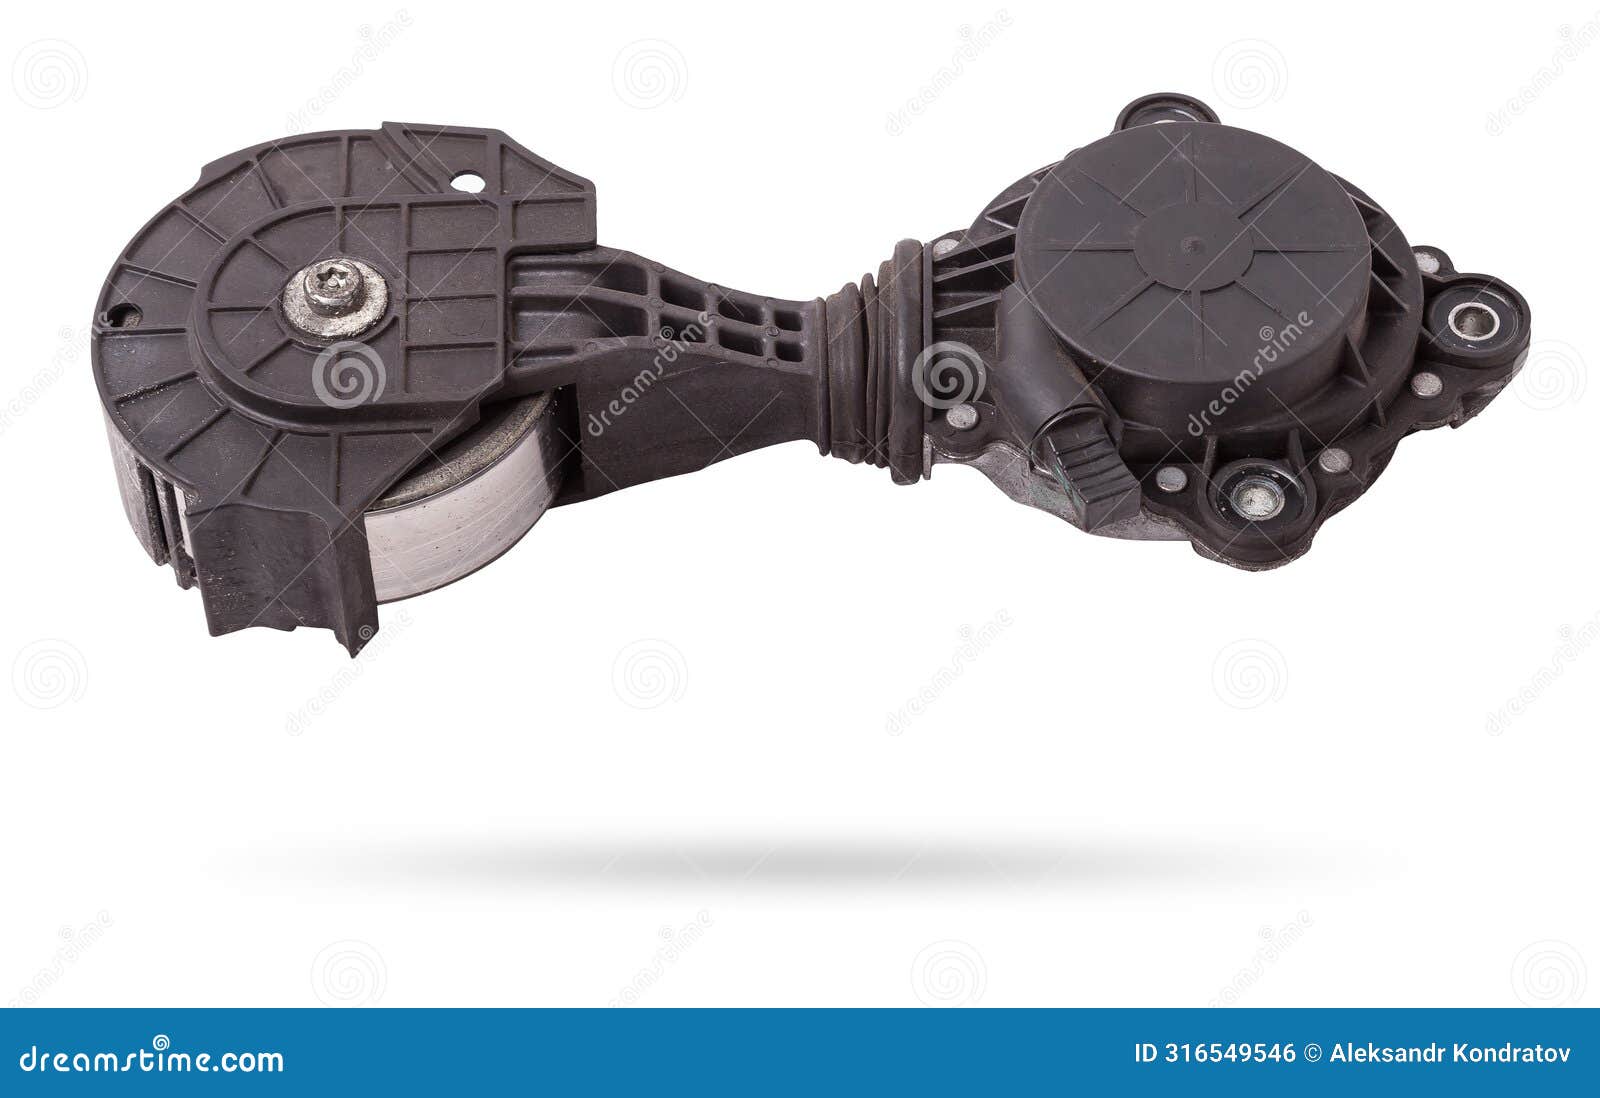 v-belt tensioner for attachments of an internal combustion engine of a car. used auto parts catalog